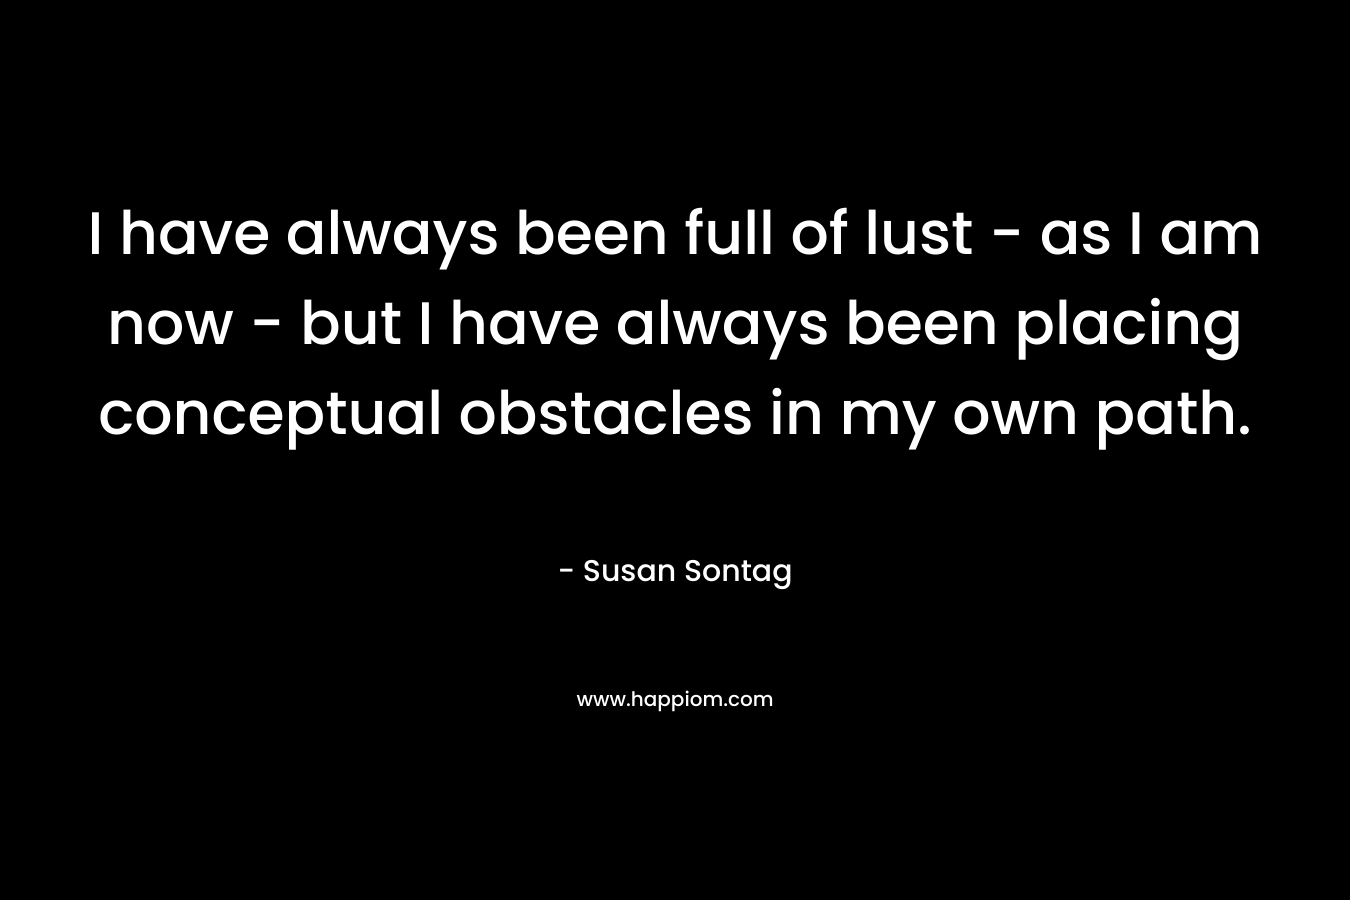 I have always been full of lust - as I am now - but I have always been placing conceptual obstacles in my own path.